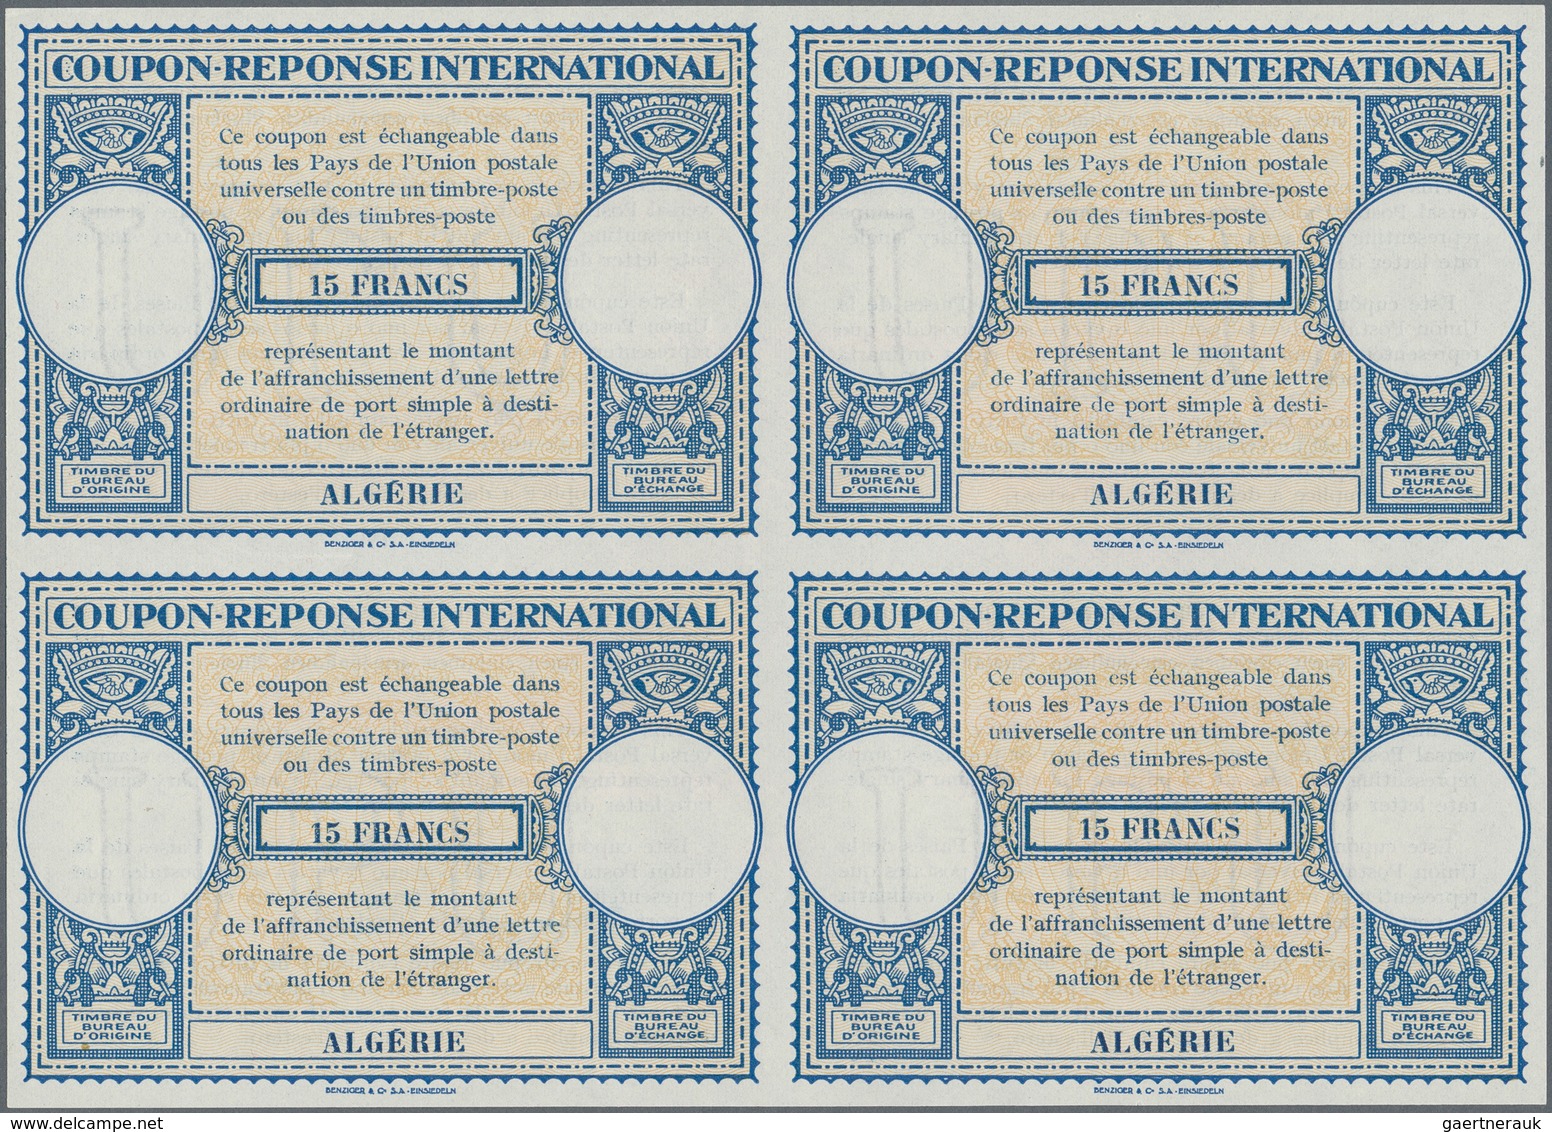 Algerien: 1940s/1950s (approx). International Reply Coupon 15 Francs (London Type) In An Unused Bloc - Briefe U. Dokumente